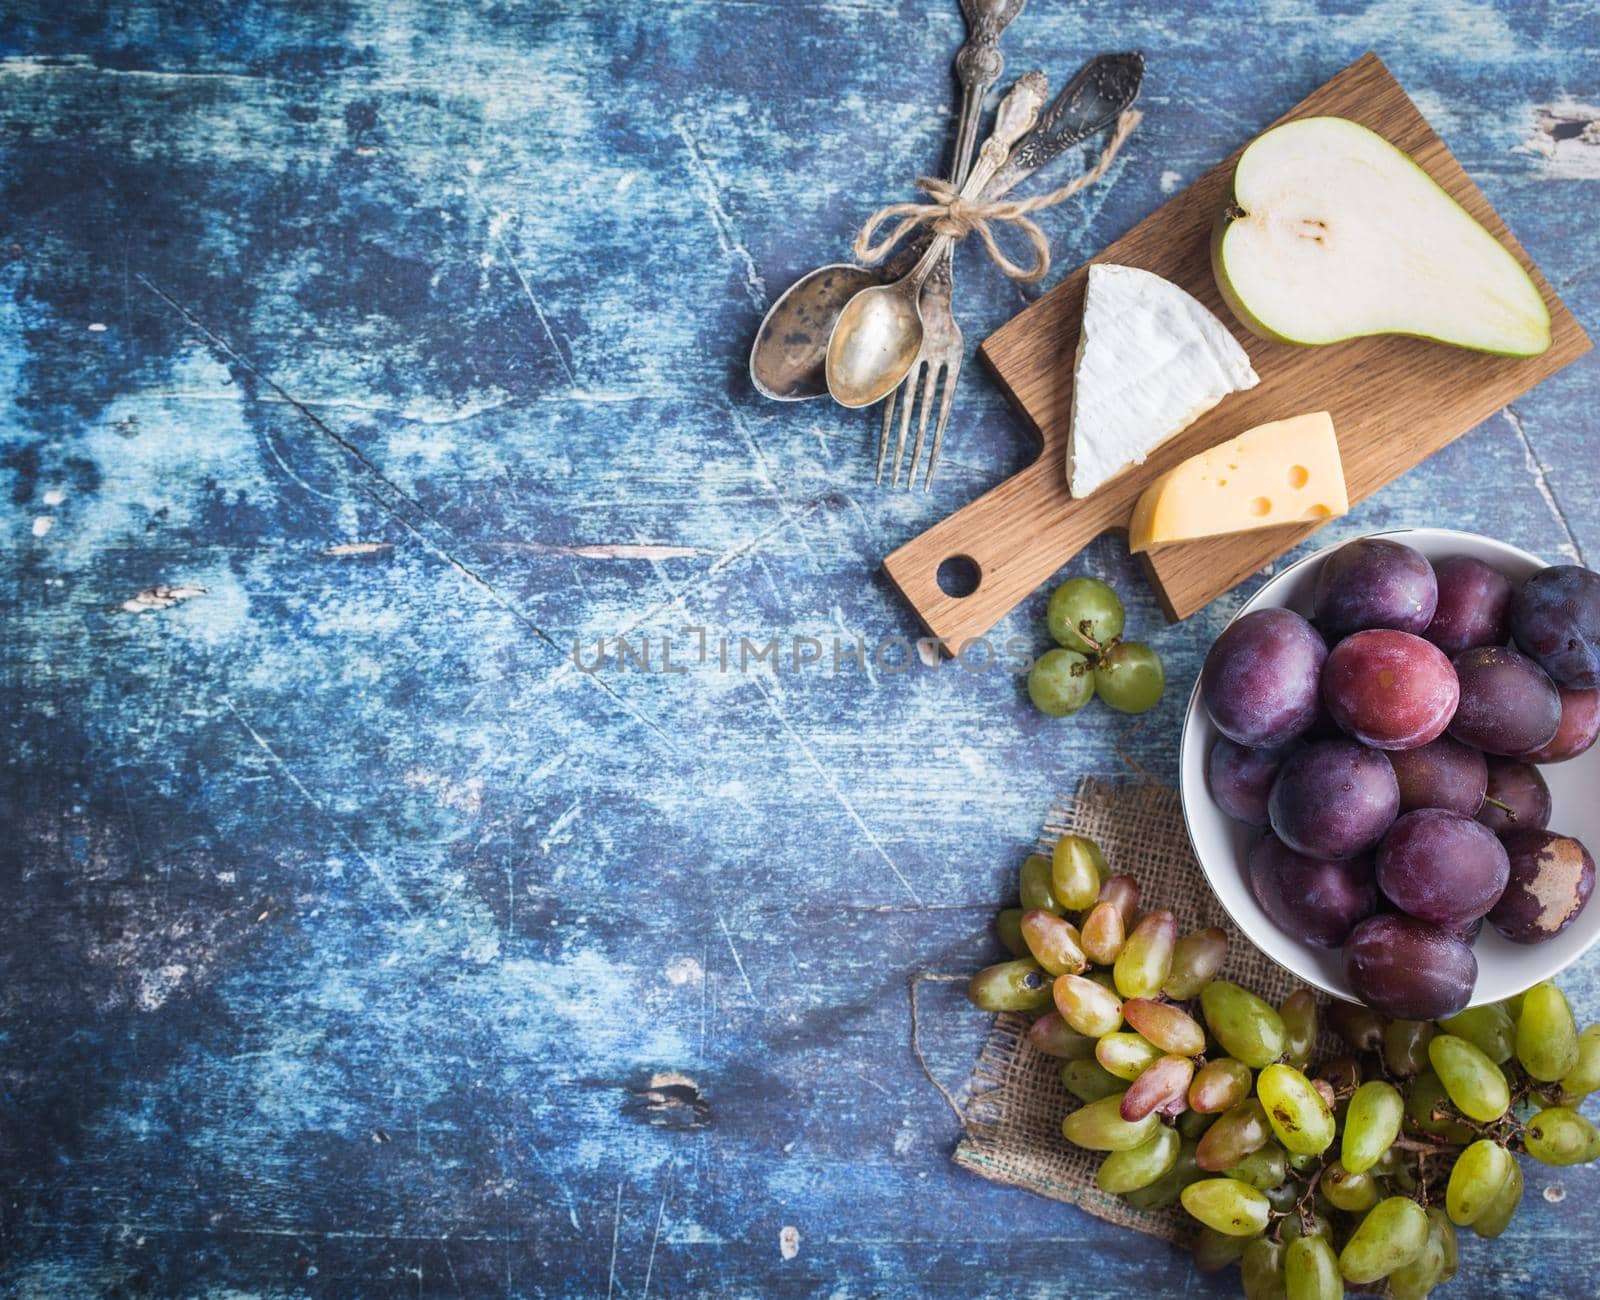 Fresh ripe pear, assorted cheeses platter, grapes, plums in bowl, blue wooden rustic background. Space for text. Top view. Fruits, Camembert, Emmental cheeses. Delicacy food. Snack/appetizer